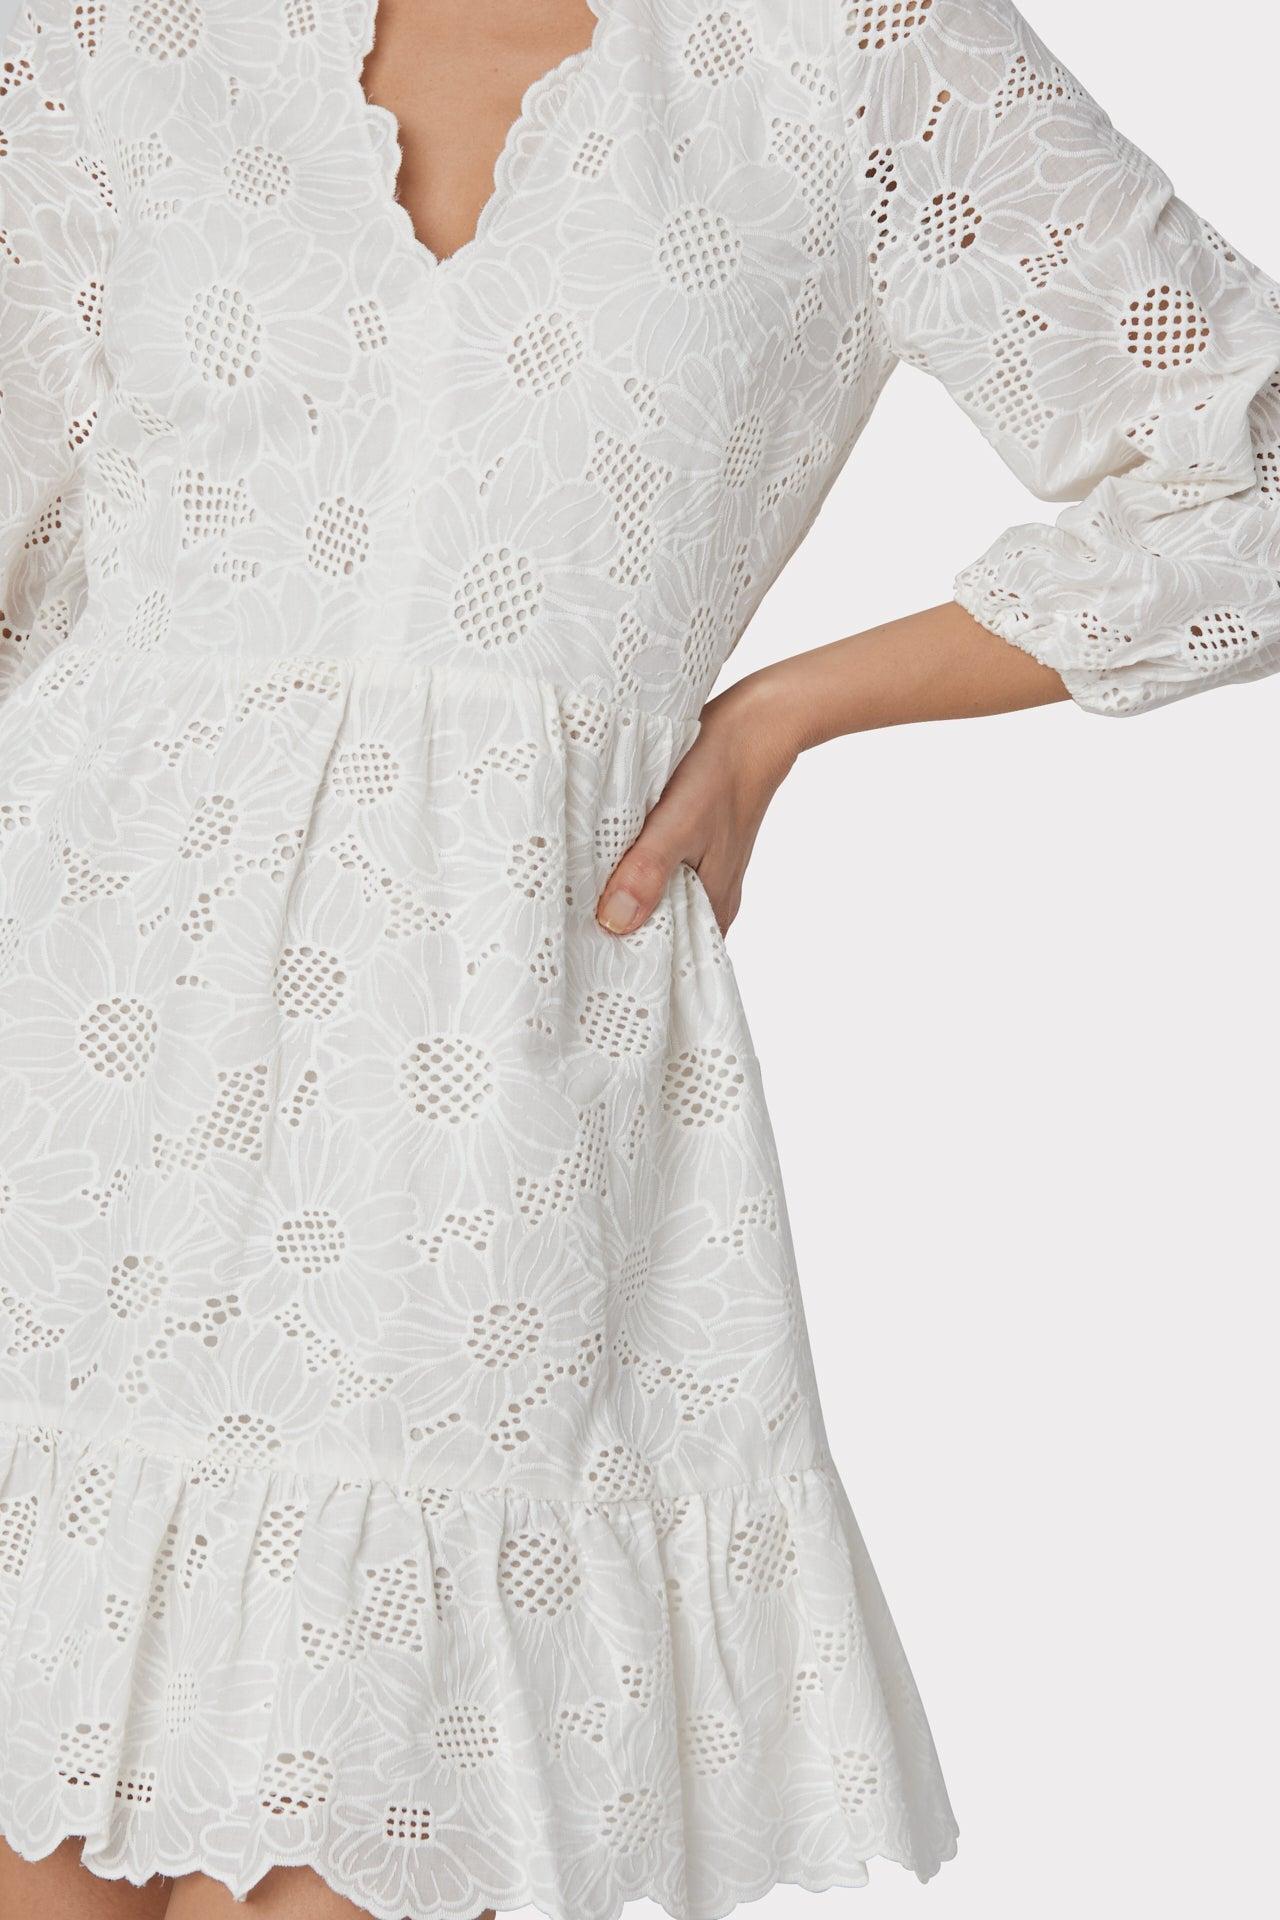 MILLY Brielle Tournesol Eyelet Dress in White | Lyst